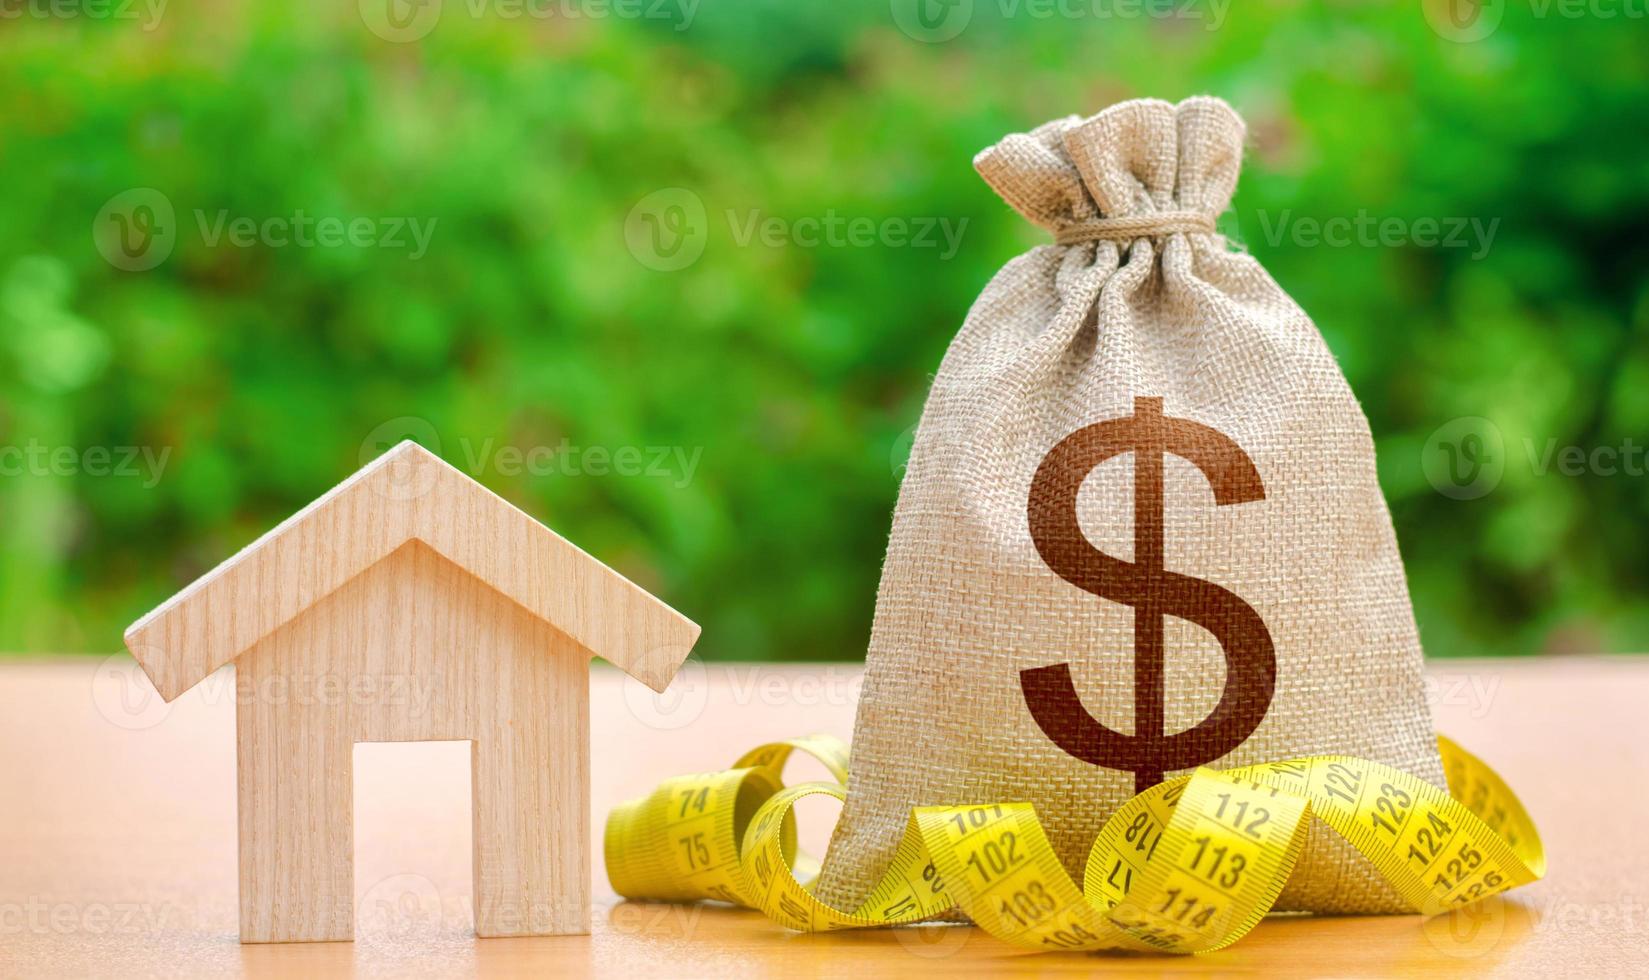 House and dollar money bag. Property valuation. Building maintenance. Mortgage loan calculation. Real estate appraisal. Budgeting. Rental income. Cost of home services, utilities. Energy efficiency photo